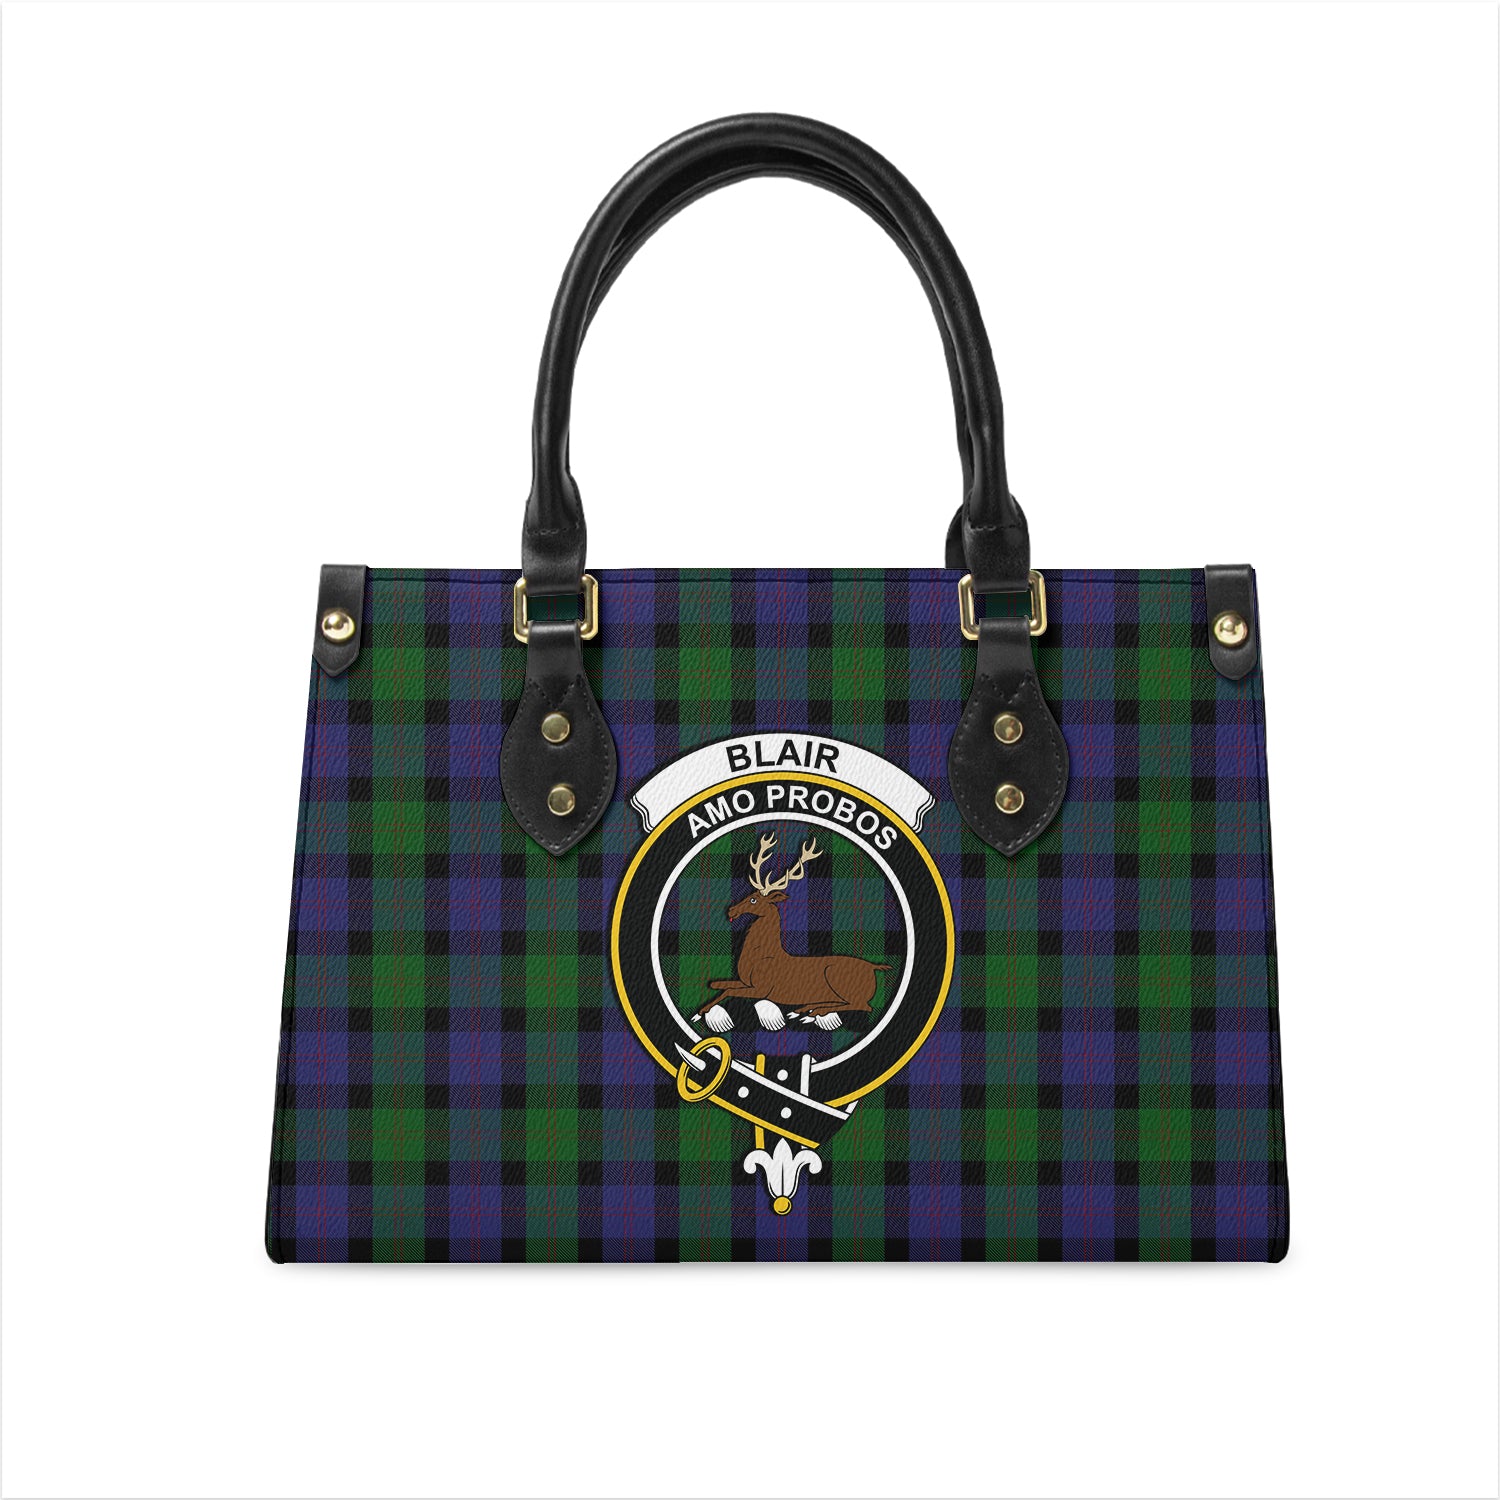 Blair Tartan Leather Bag with Family Crest One Size 29*11*20 cm - Tartanvibesclothing